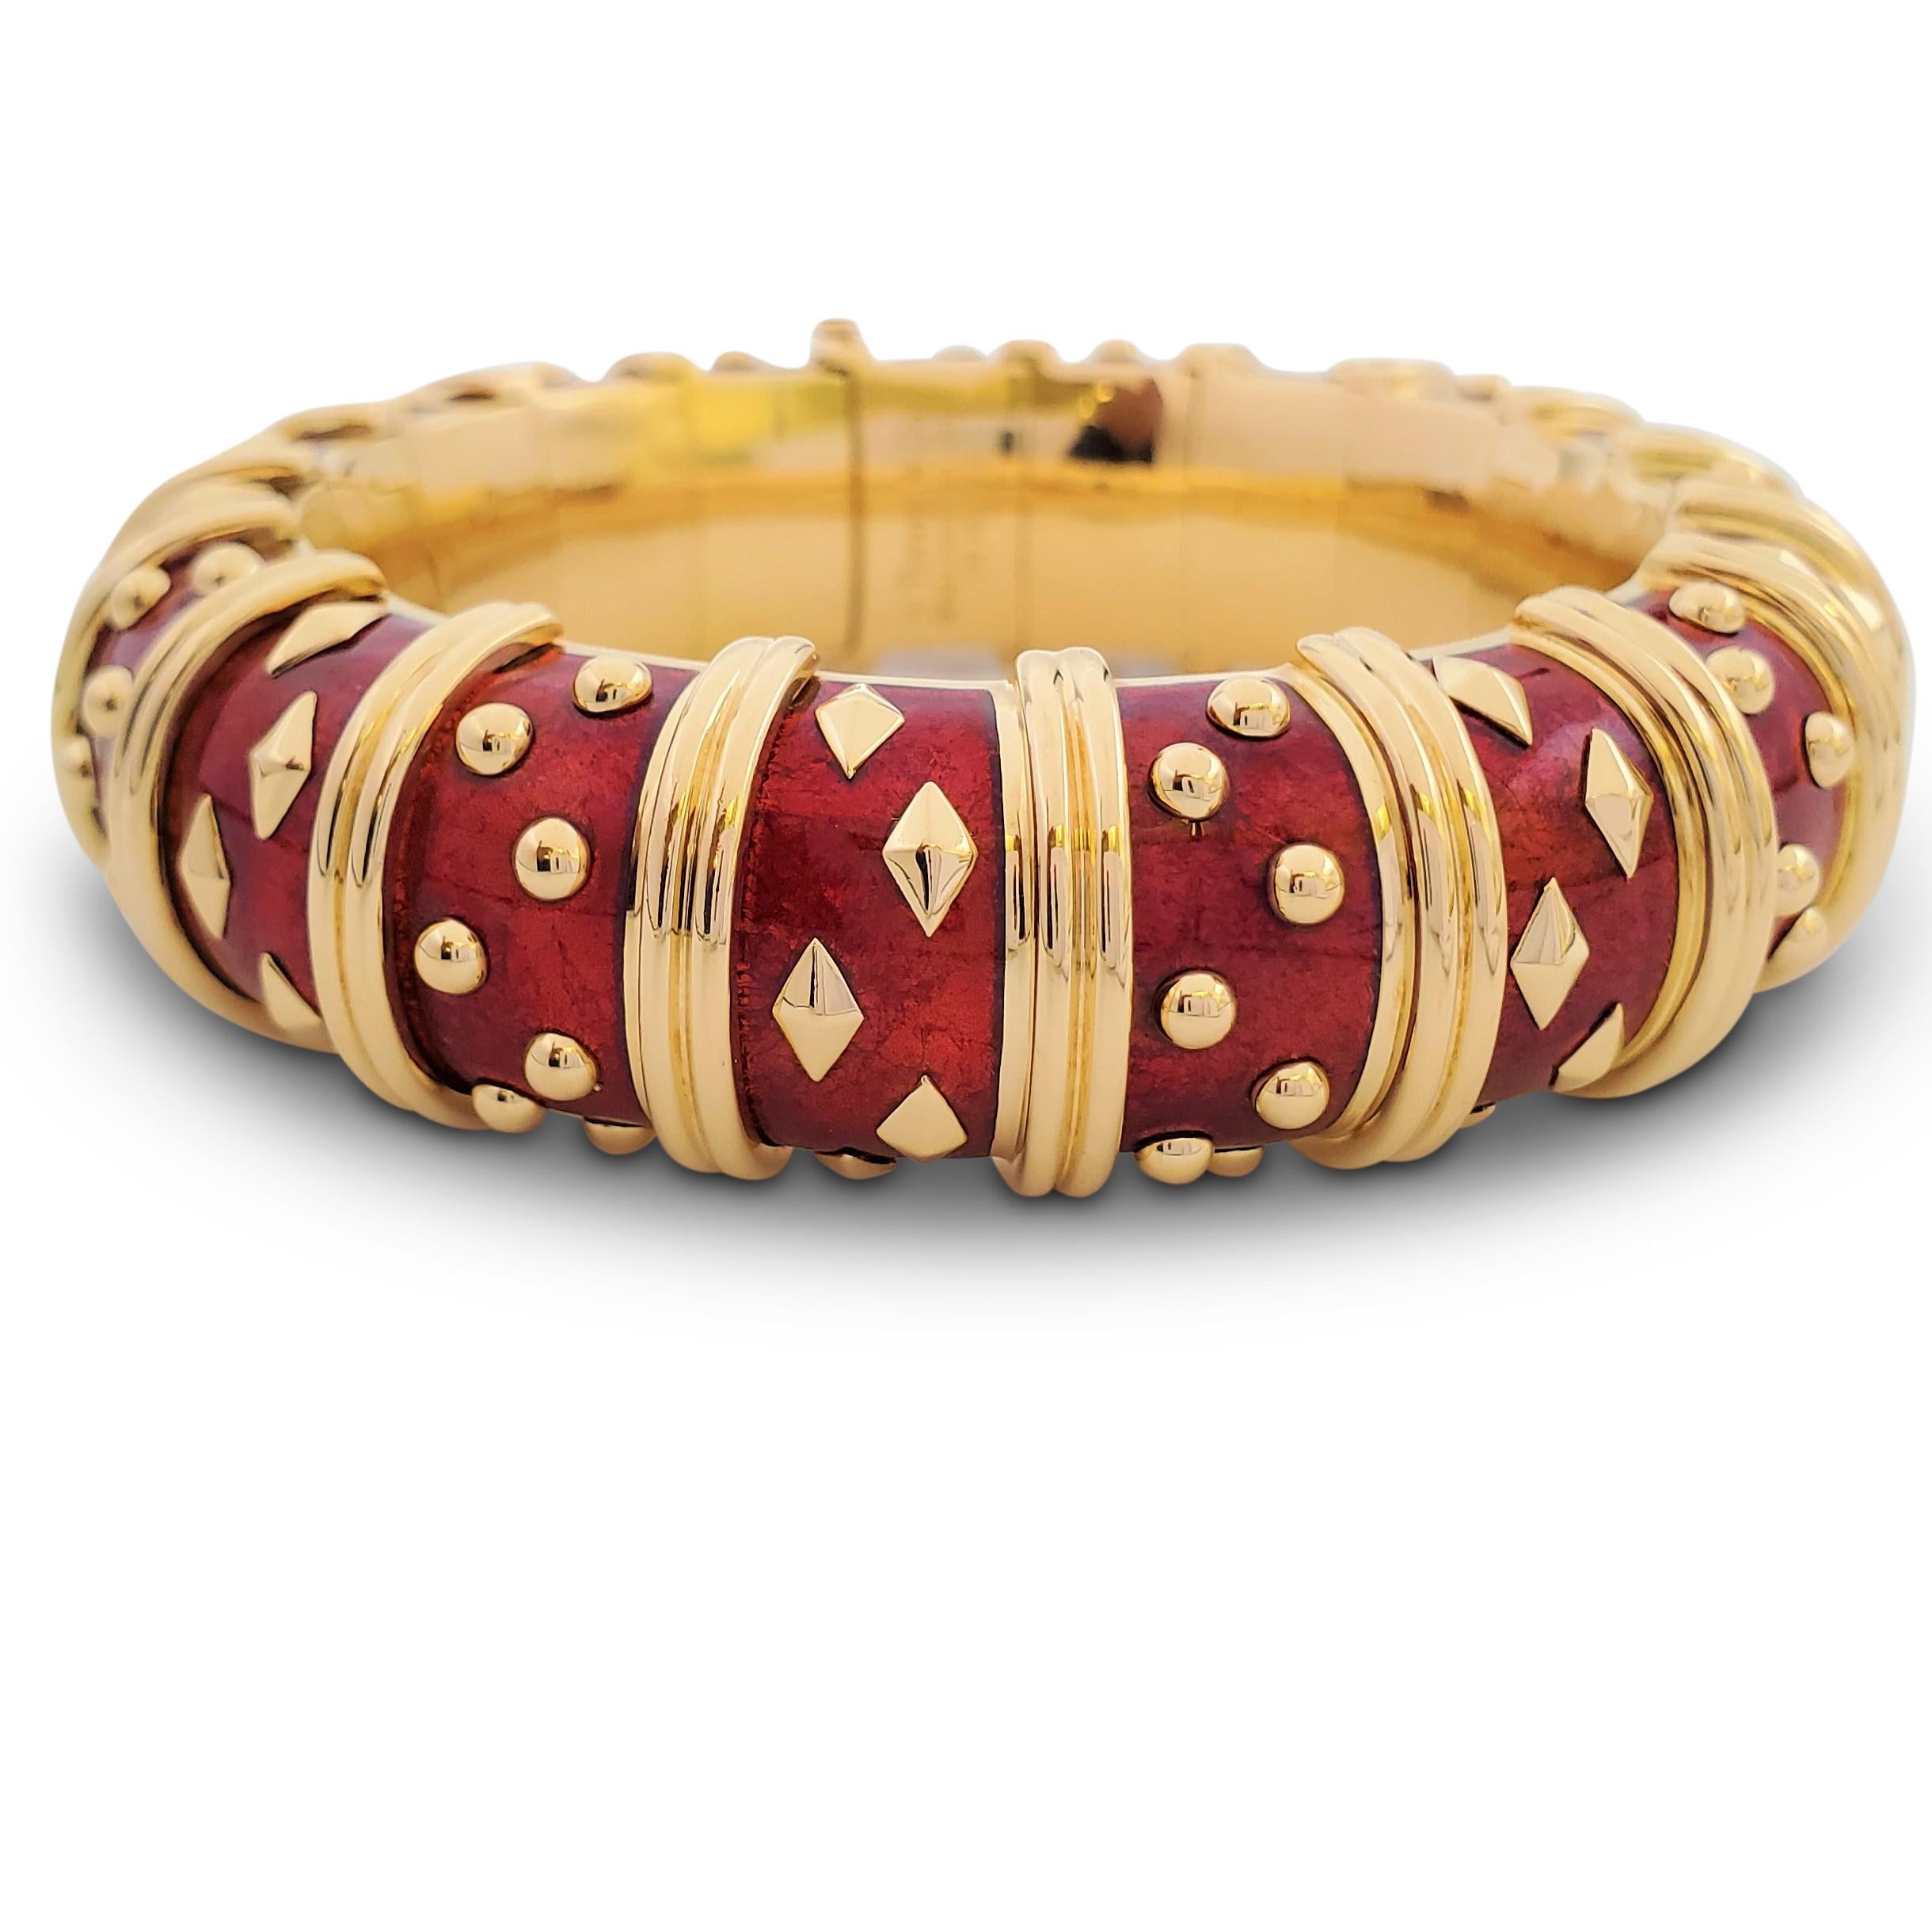 An iconic design by Jean Schlumberger for Tiffany & Co. crafted in 18 karat yellow gold with rich red enamel, accented by alternating clusters of raised gold dots and diamond shapes. The semi-flexible bracelet measures 20mm wide. Signed Tiffany &